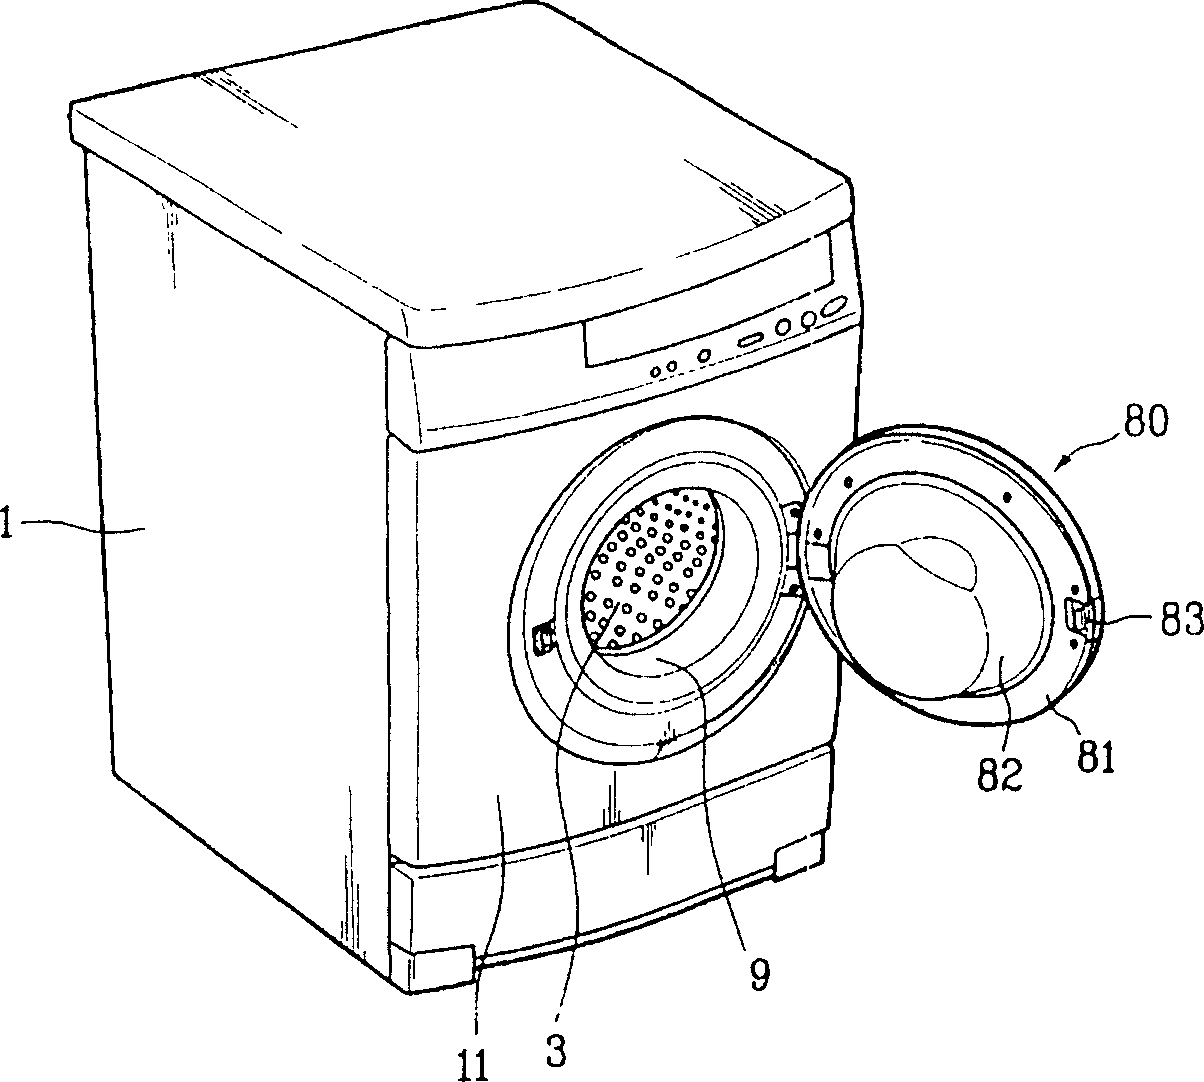 Hinge system for inclined door of rolling drum washing machine